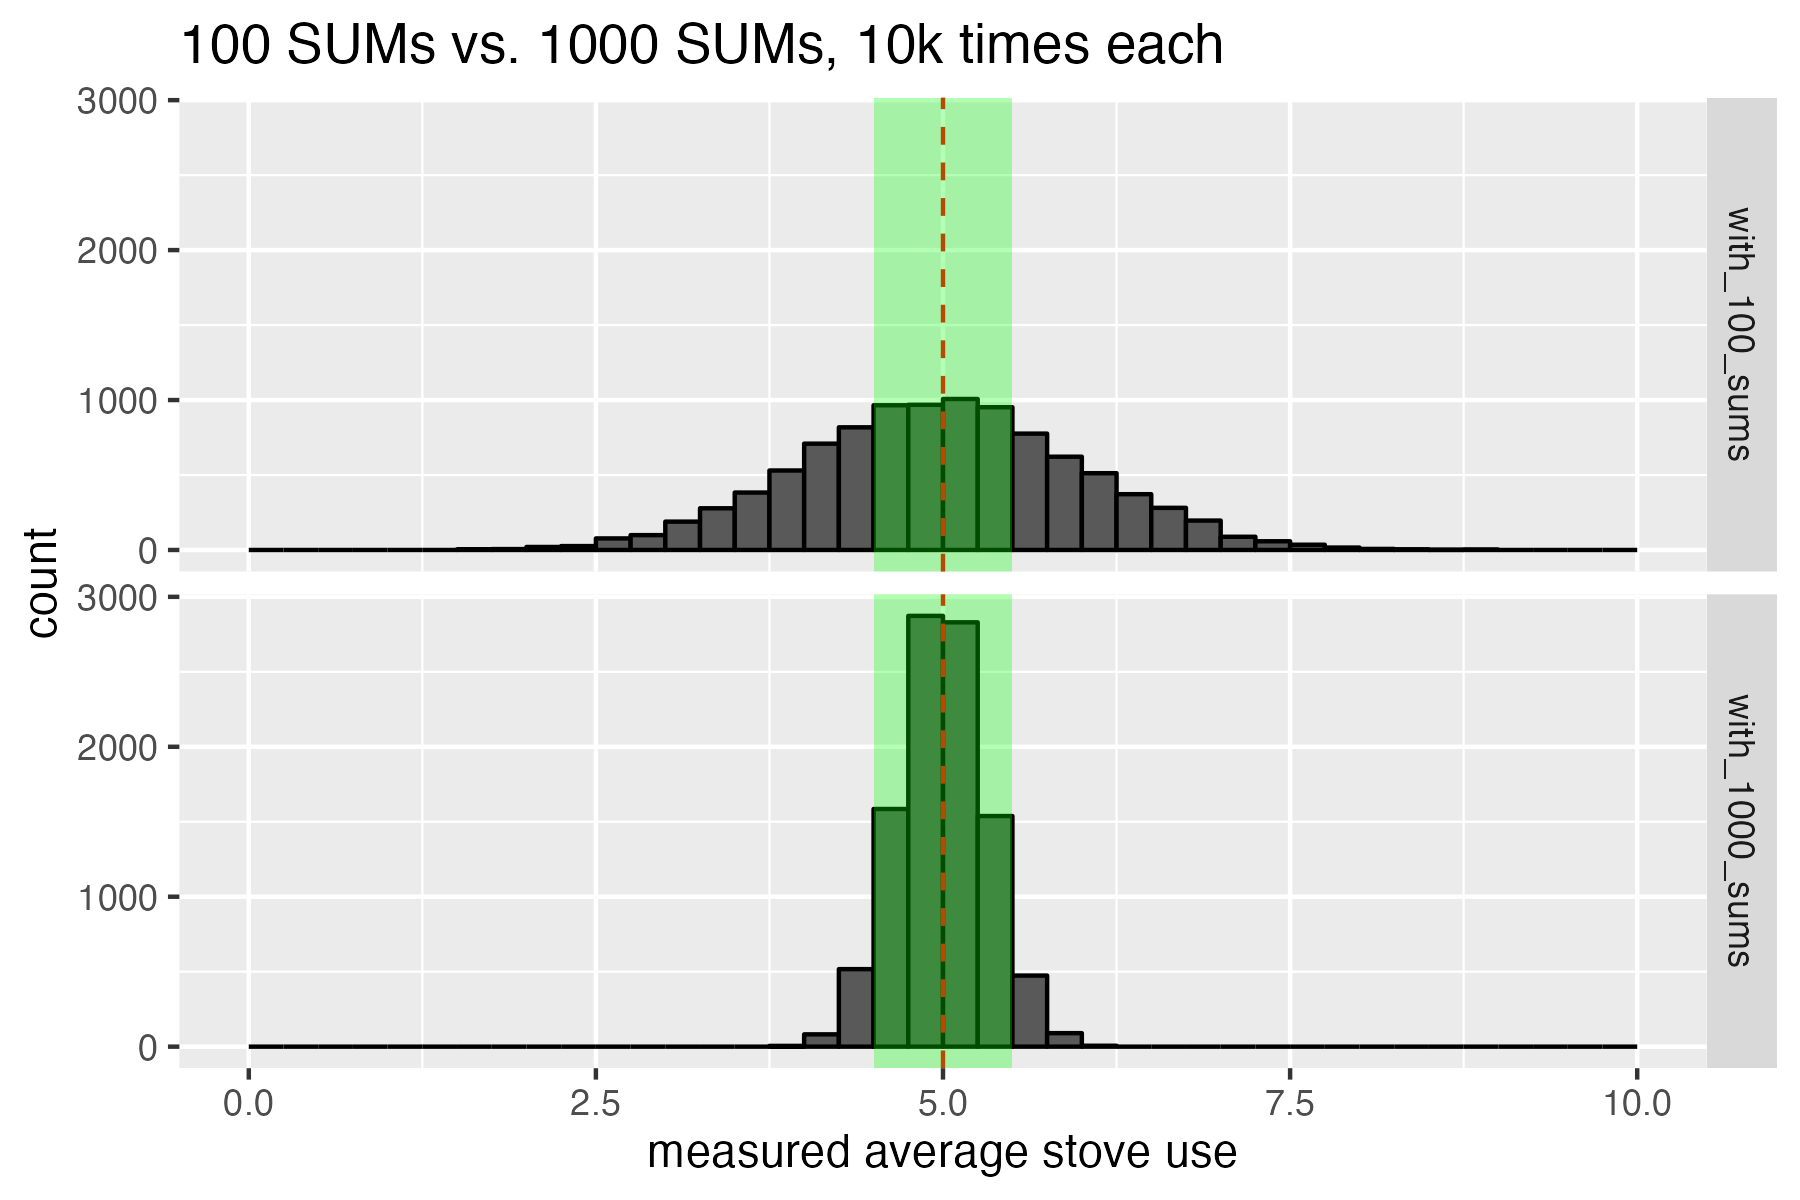 When we use 1000 SUMs instead of 100 SUMs, we get a much tighter distribution. Now 90% of the 10k experiments fall within the ±10% error of the true population mean target we were hoping for.